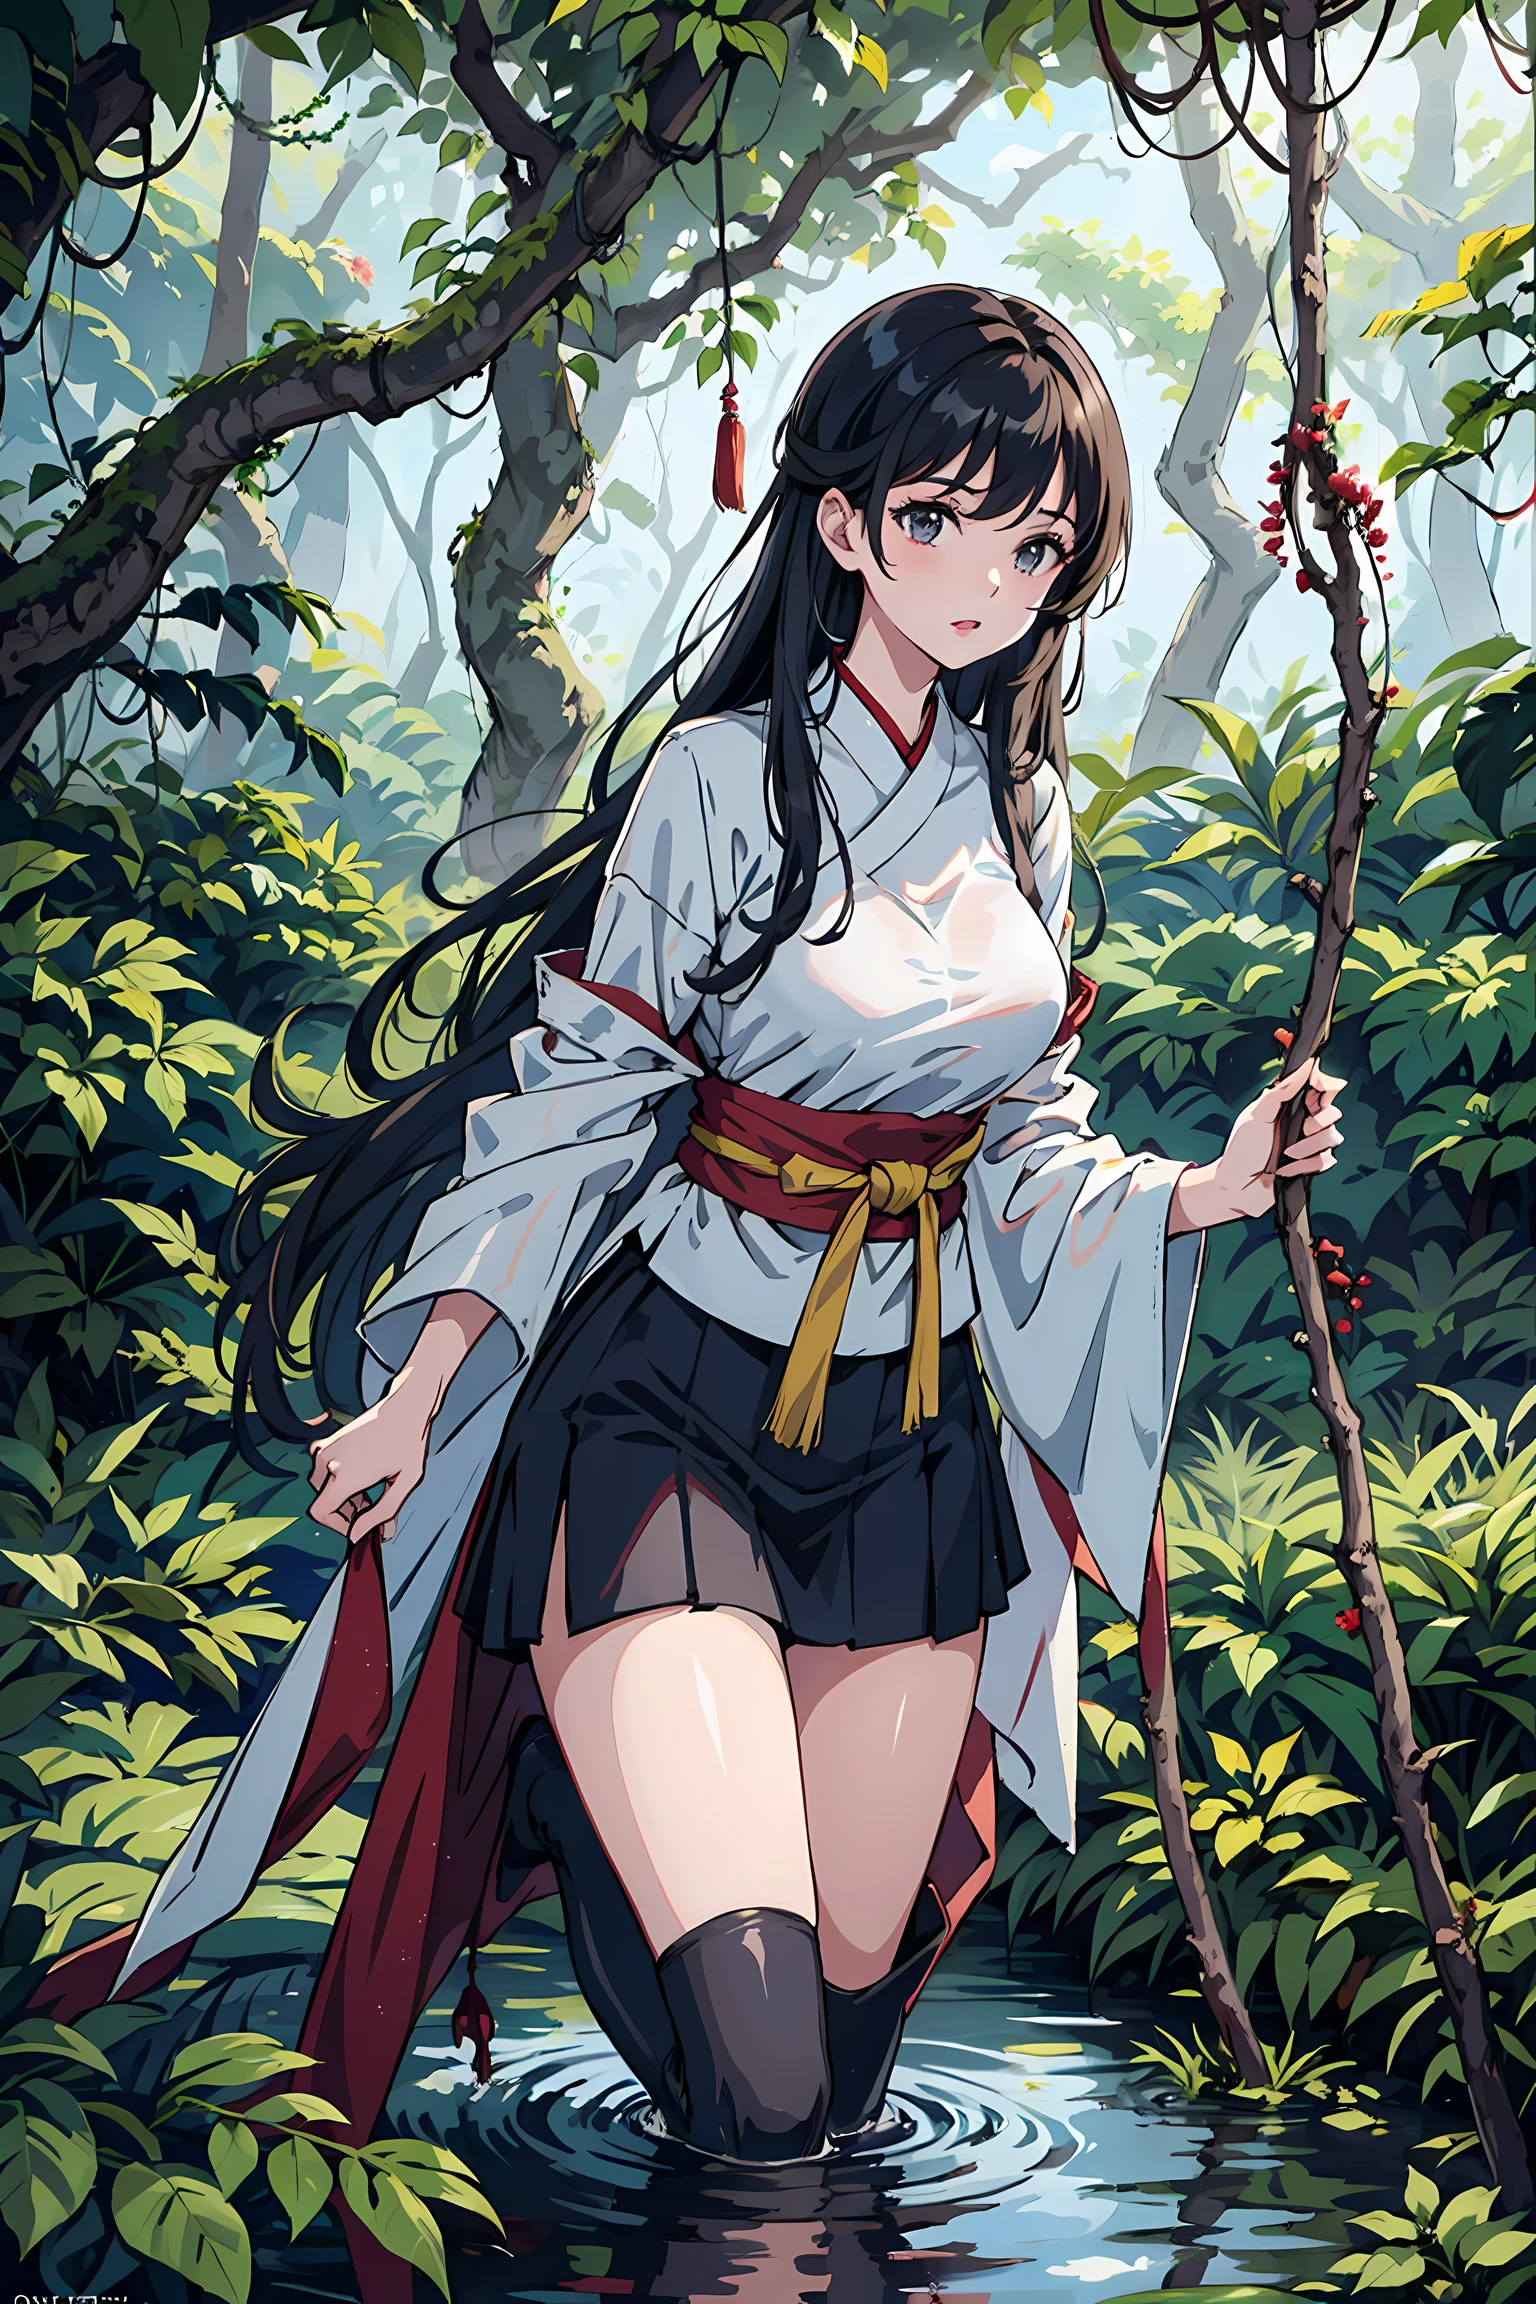 Isekai Fantasy、Isekai Jungle、Sea of Trees in Another World、Rainforest Jungle、amazon's jungle、Southeast Asian Jungles、Overgrown with mangroves、forest spirit、Tree Spirit、Wooden Monster、Beast-type monsters、sludge、mud、puddles、dark  forest、Jungle without light、A female heroine reincarnated in another world、Female heroines of Japan anime、Trees with viscous substances precipitated々、vine、Vine hanging from a tree branch overhead、Female heroine in a priestess costume、Female heroine is a saint、Around the saint、The holy aura shines、night situation,